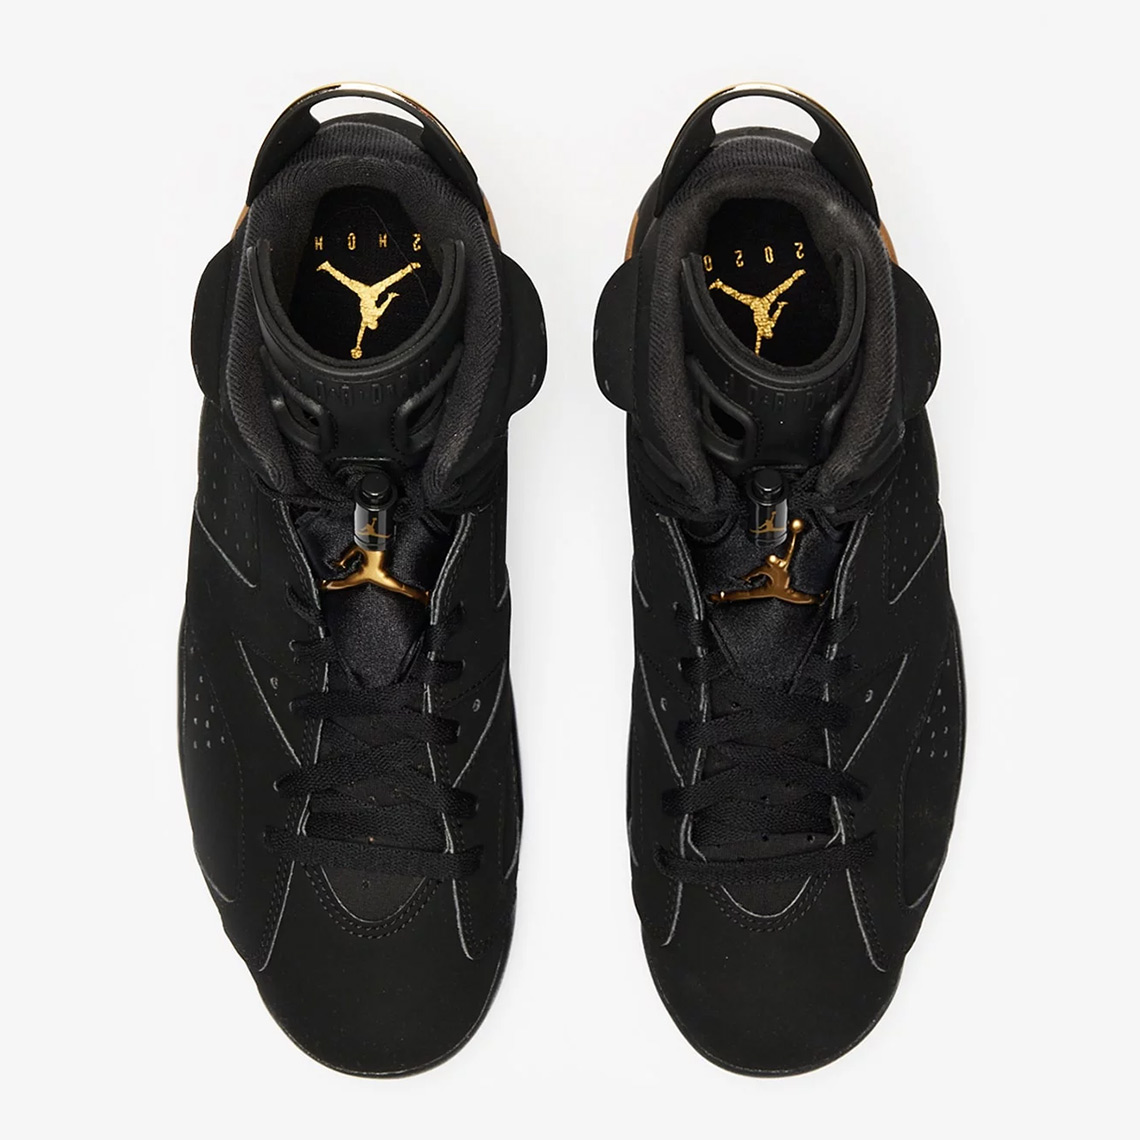 The Jordan brand has remixed one of the most iconic J colourways with this recently surfaced Dmp Ct4954 007 Official Release Date 4